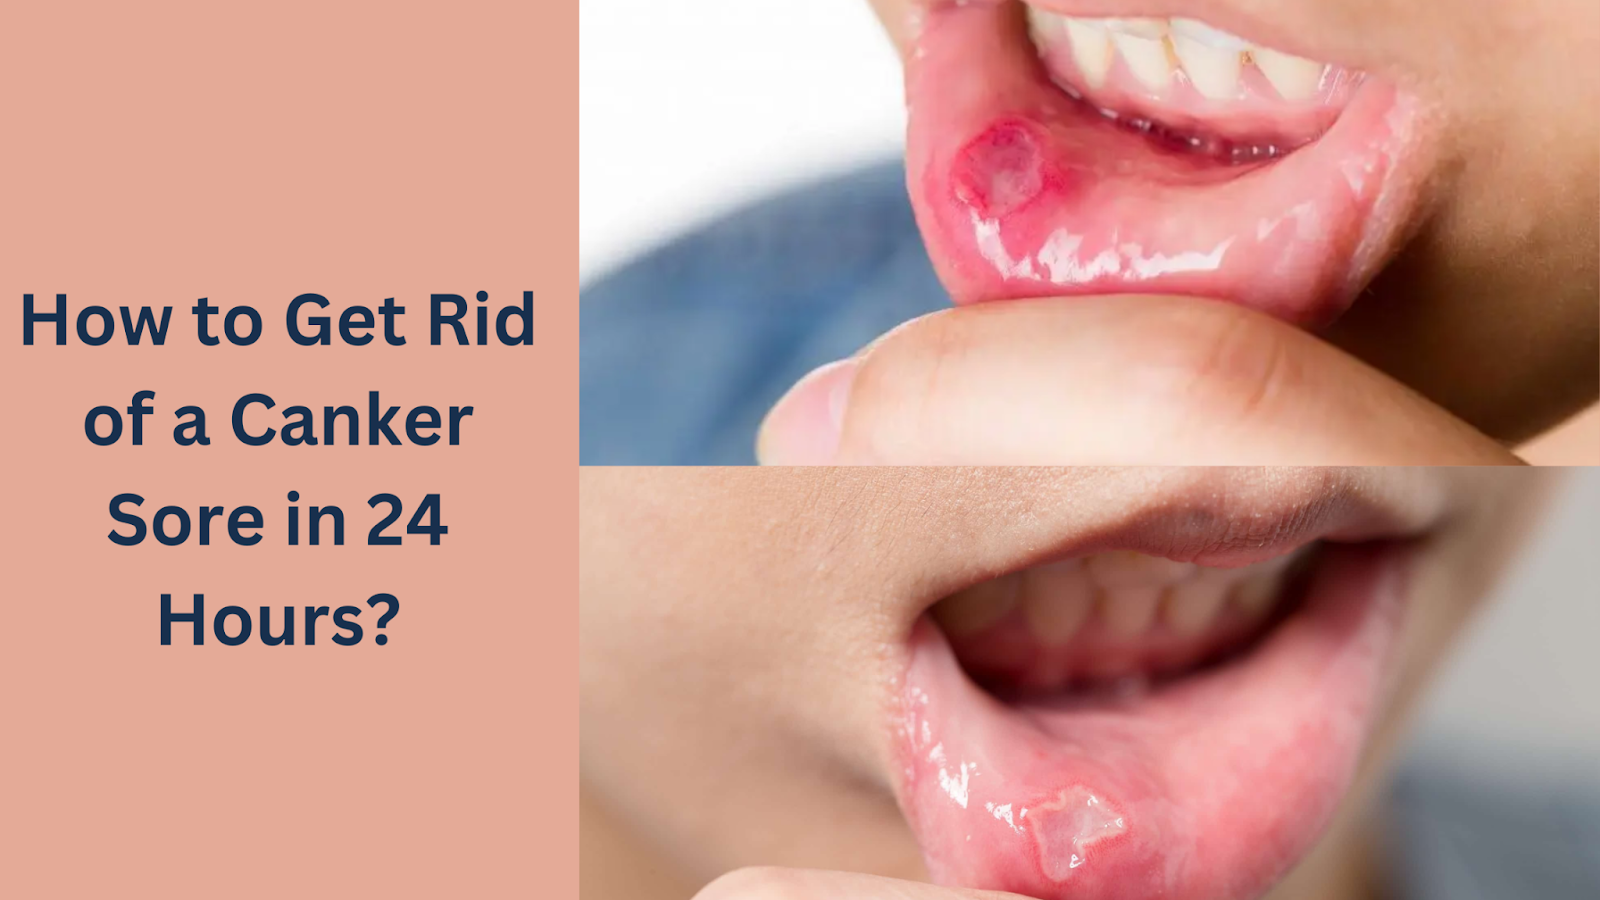 how to get rid of a canker sore in 24 hours